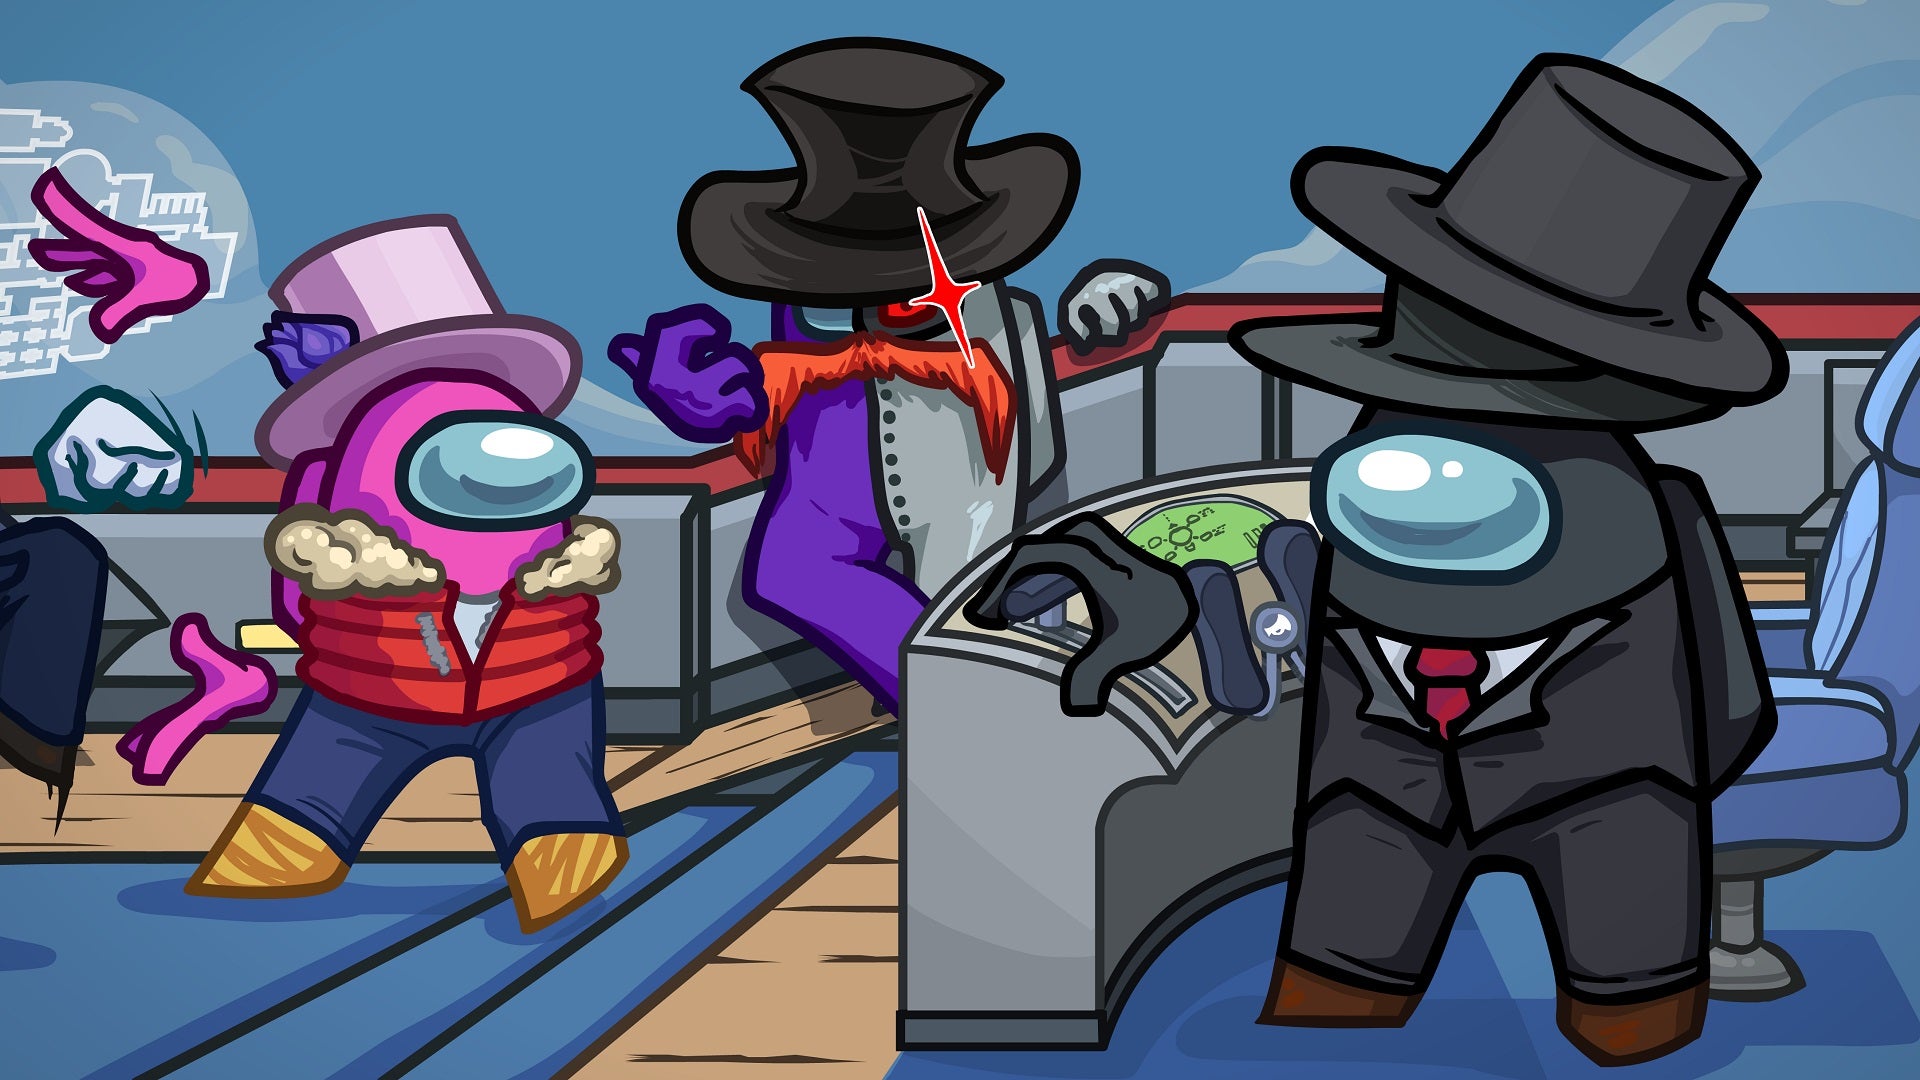 Some suspicious looking fellows with top hats hanging out in Among Us' upcoming Airship map.